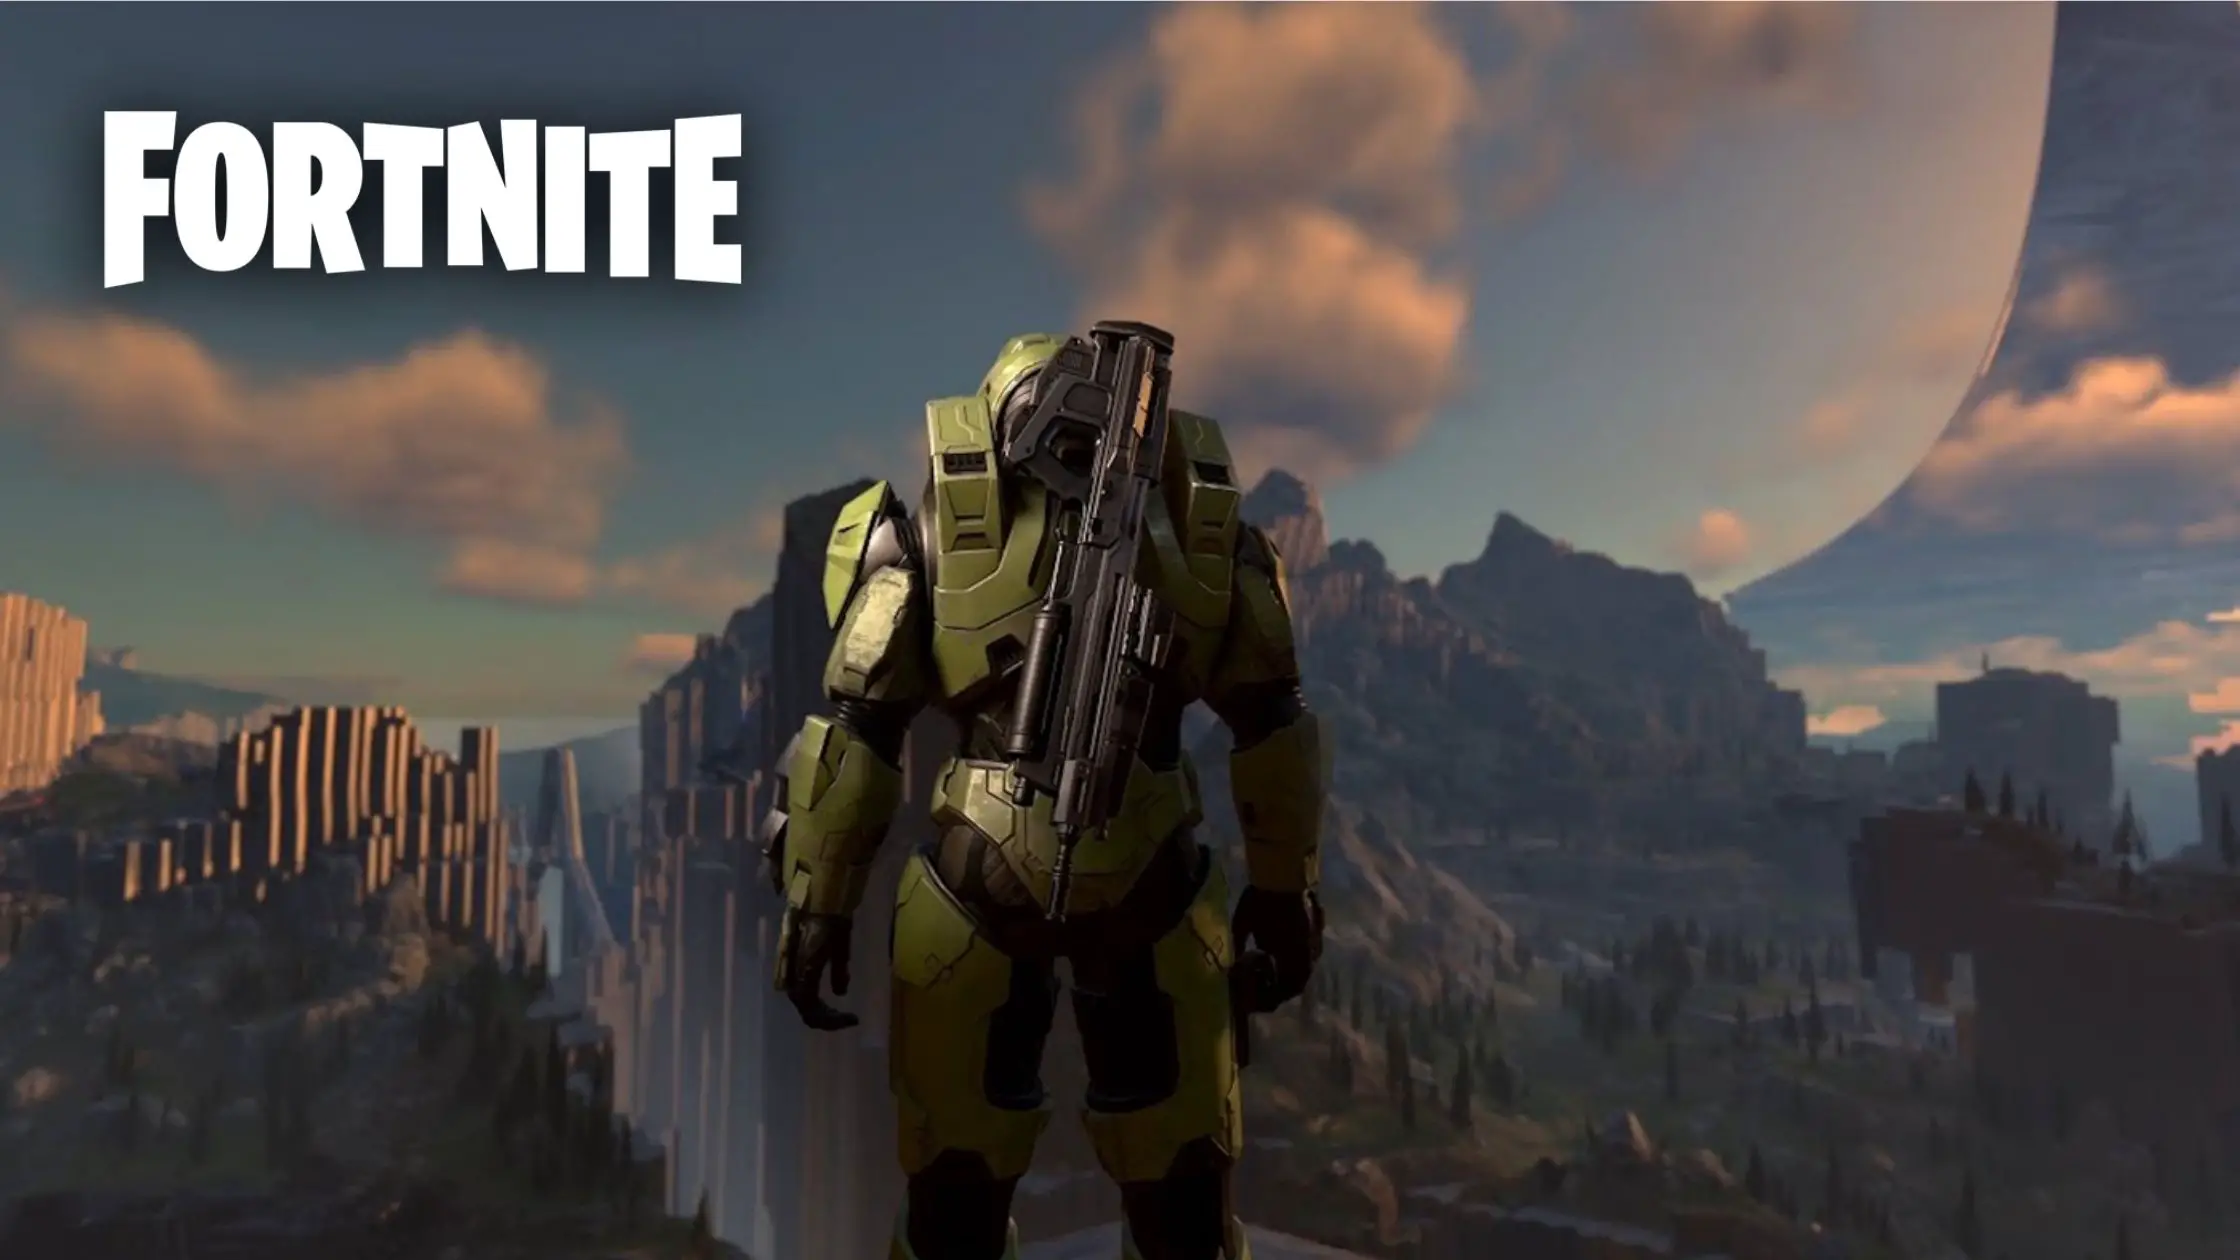 is-master-chief-coming-to-fortnite-everything-we-know-so-far